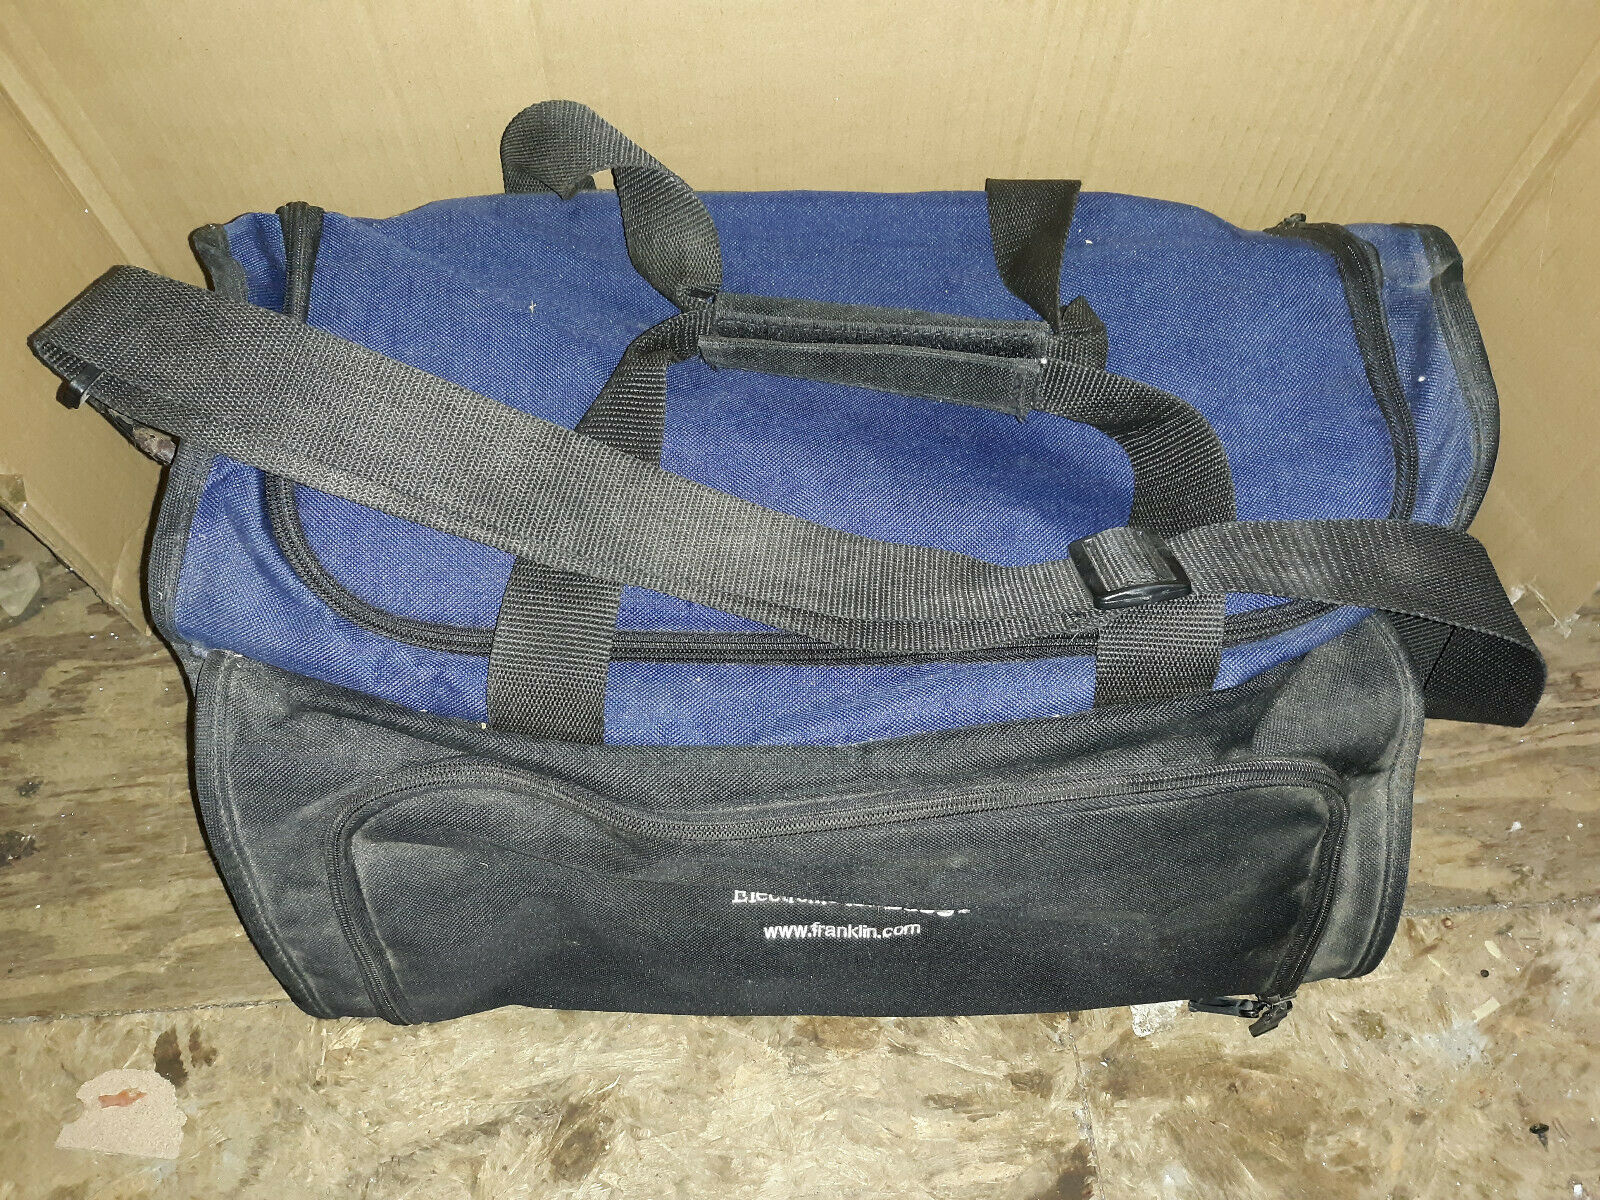 20EE33 NYLON TOOL BAG, FRANKLIN, 19” X 11” X 11” +/- OVERALL, ZIPPERED T&F, GC - $13.93